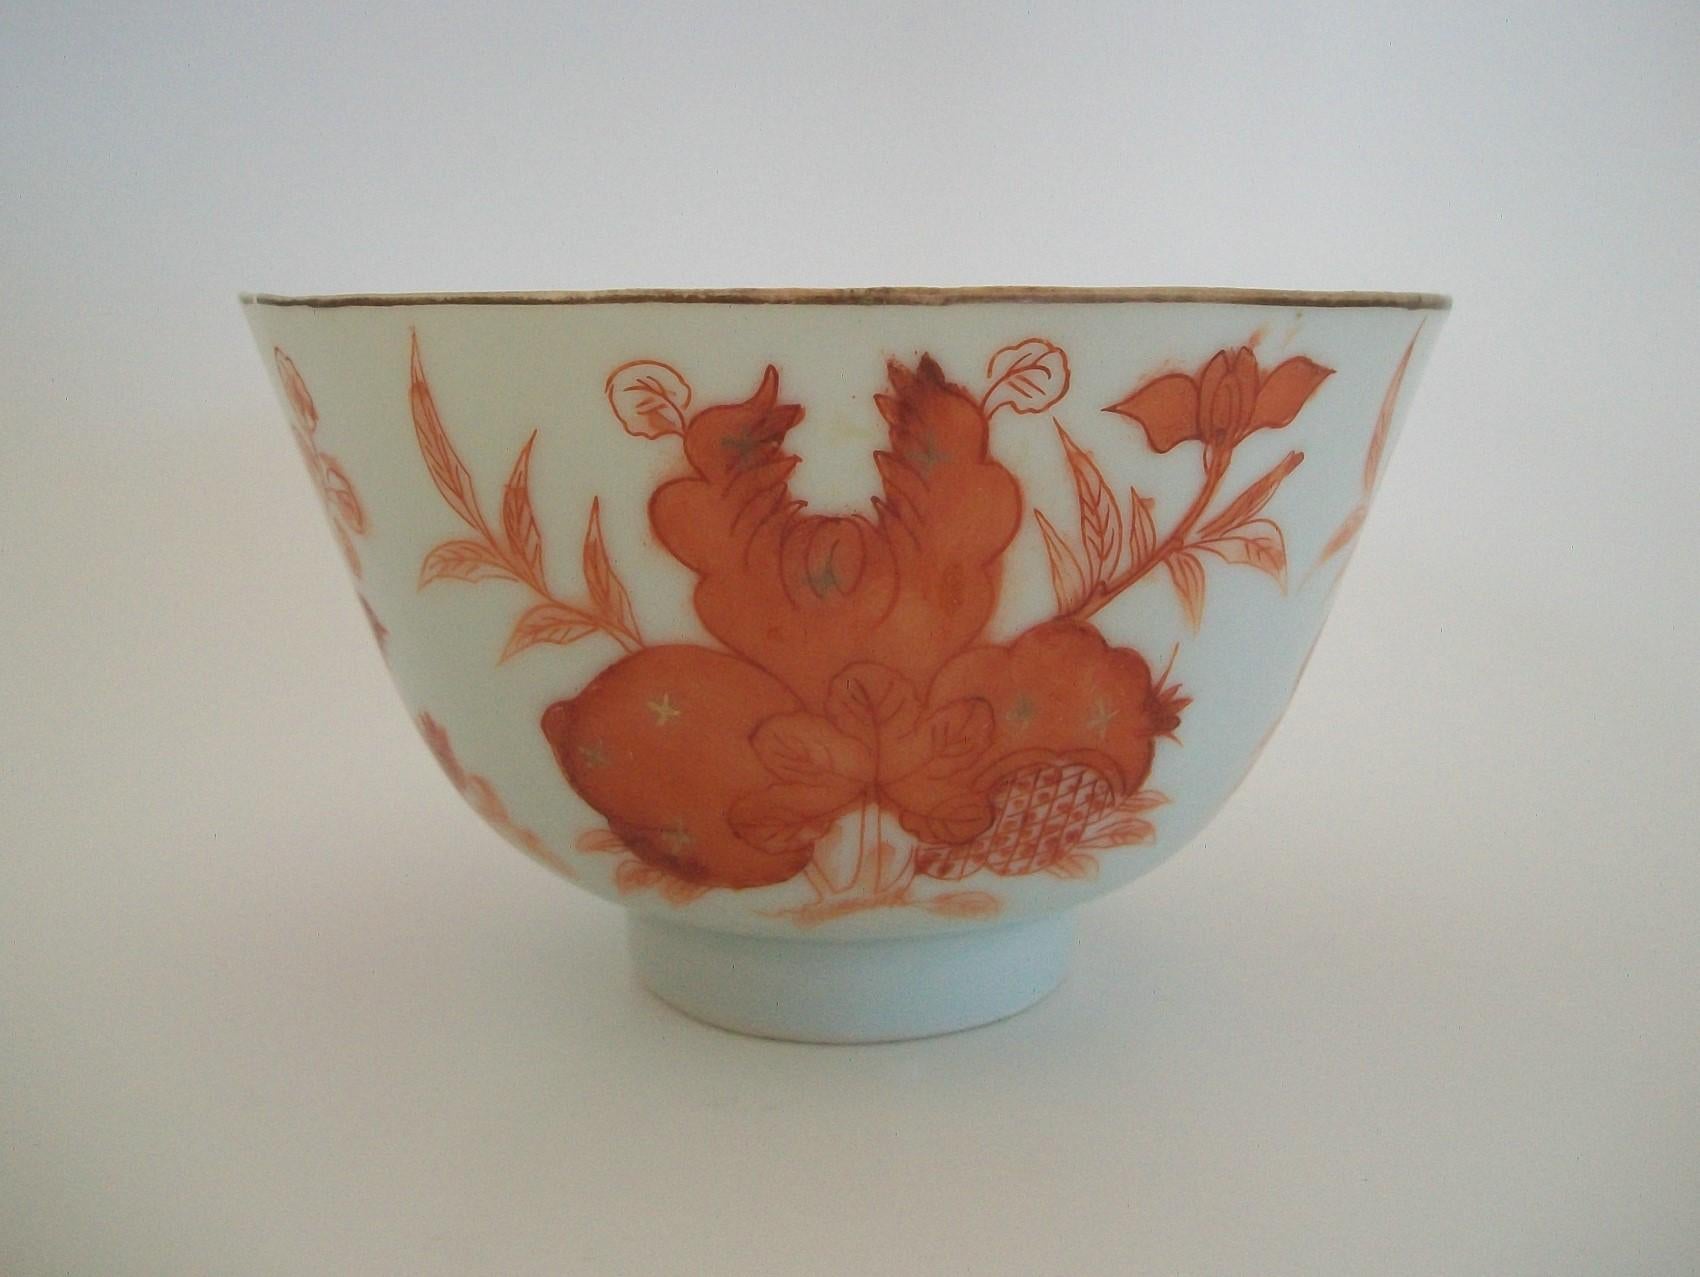 Antique iron red (orange) and gilt decorated porcelain bowl - featuring hand painted bats surrounding a shou character beside peaches and scrolling foliage - gilded border edge - Guangxu square seal mark to the base - China - early 20th